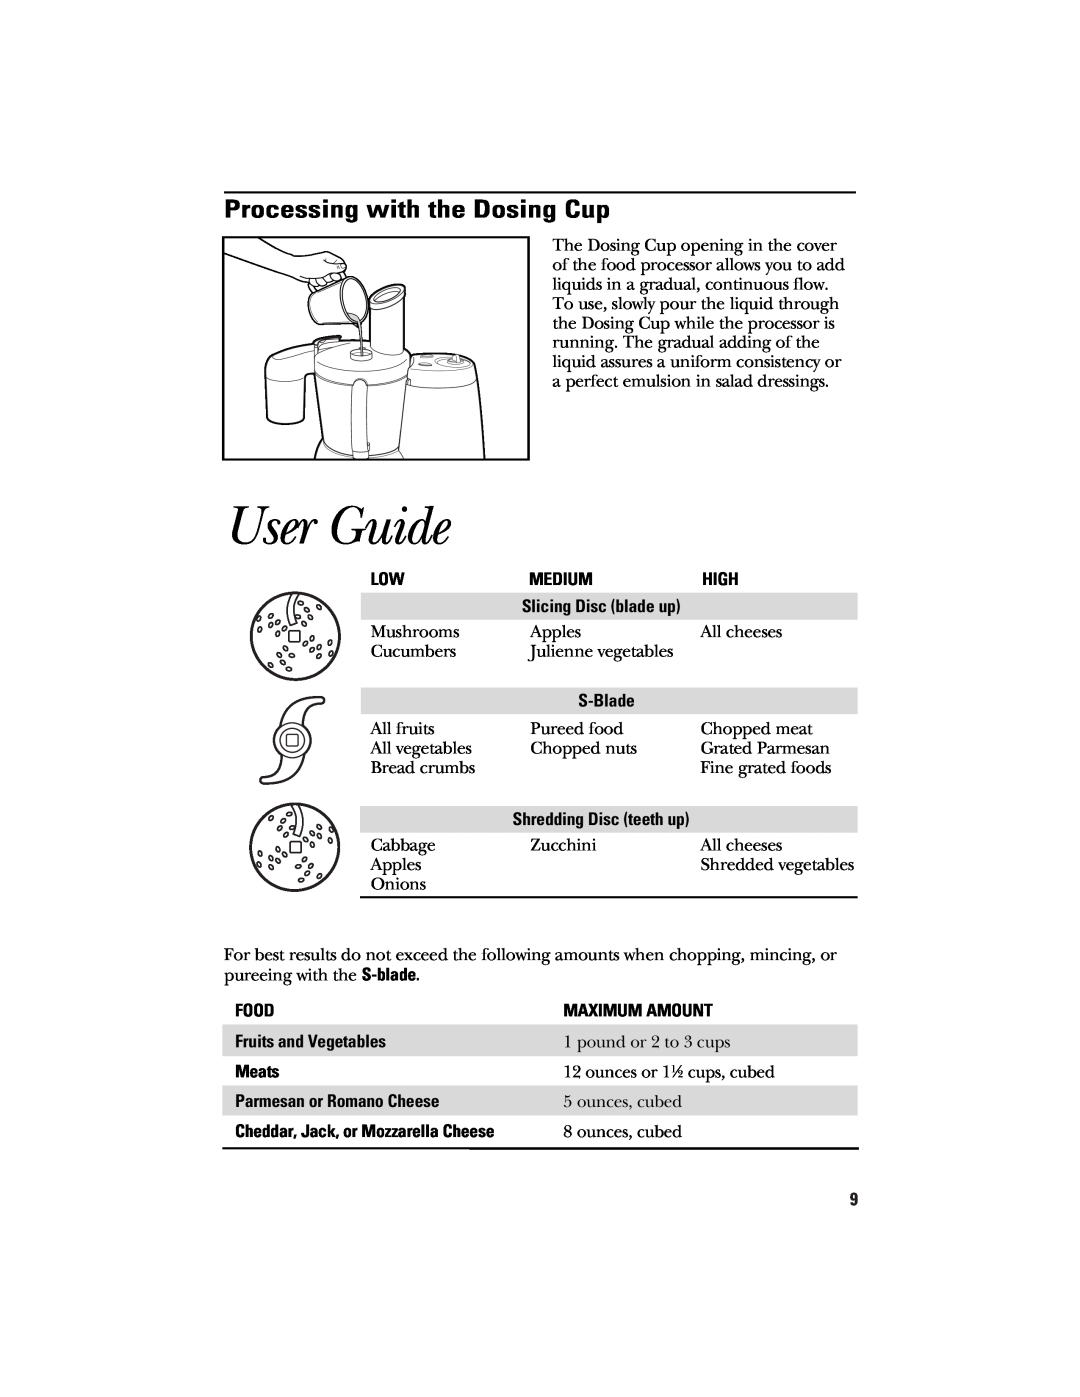 GE 840074400 manual User Guide, Processing with the Dosing Cup 